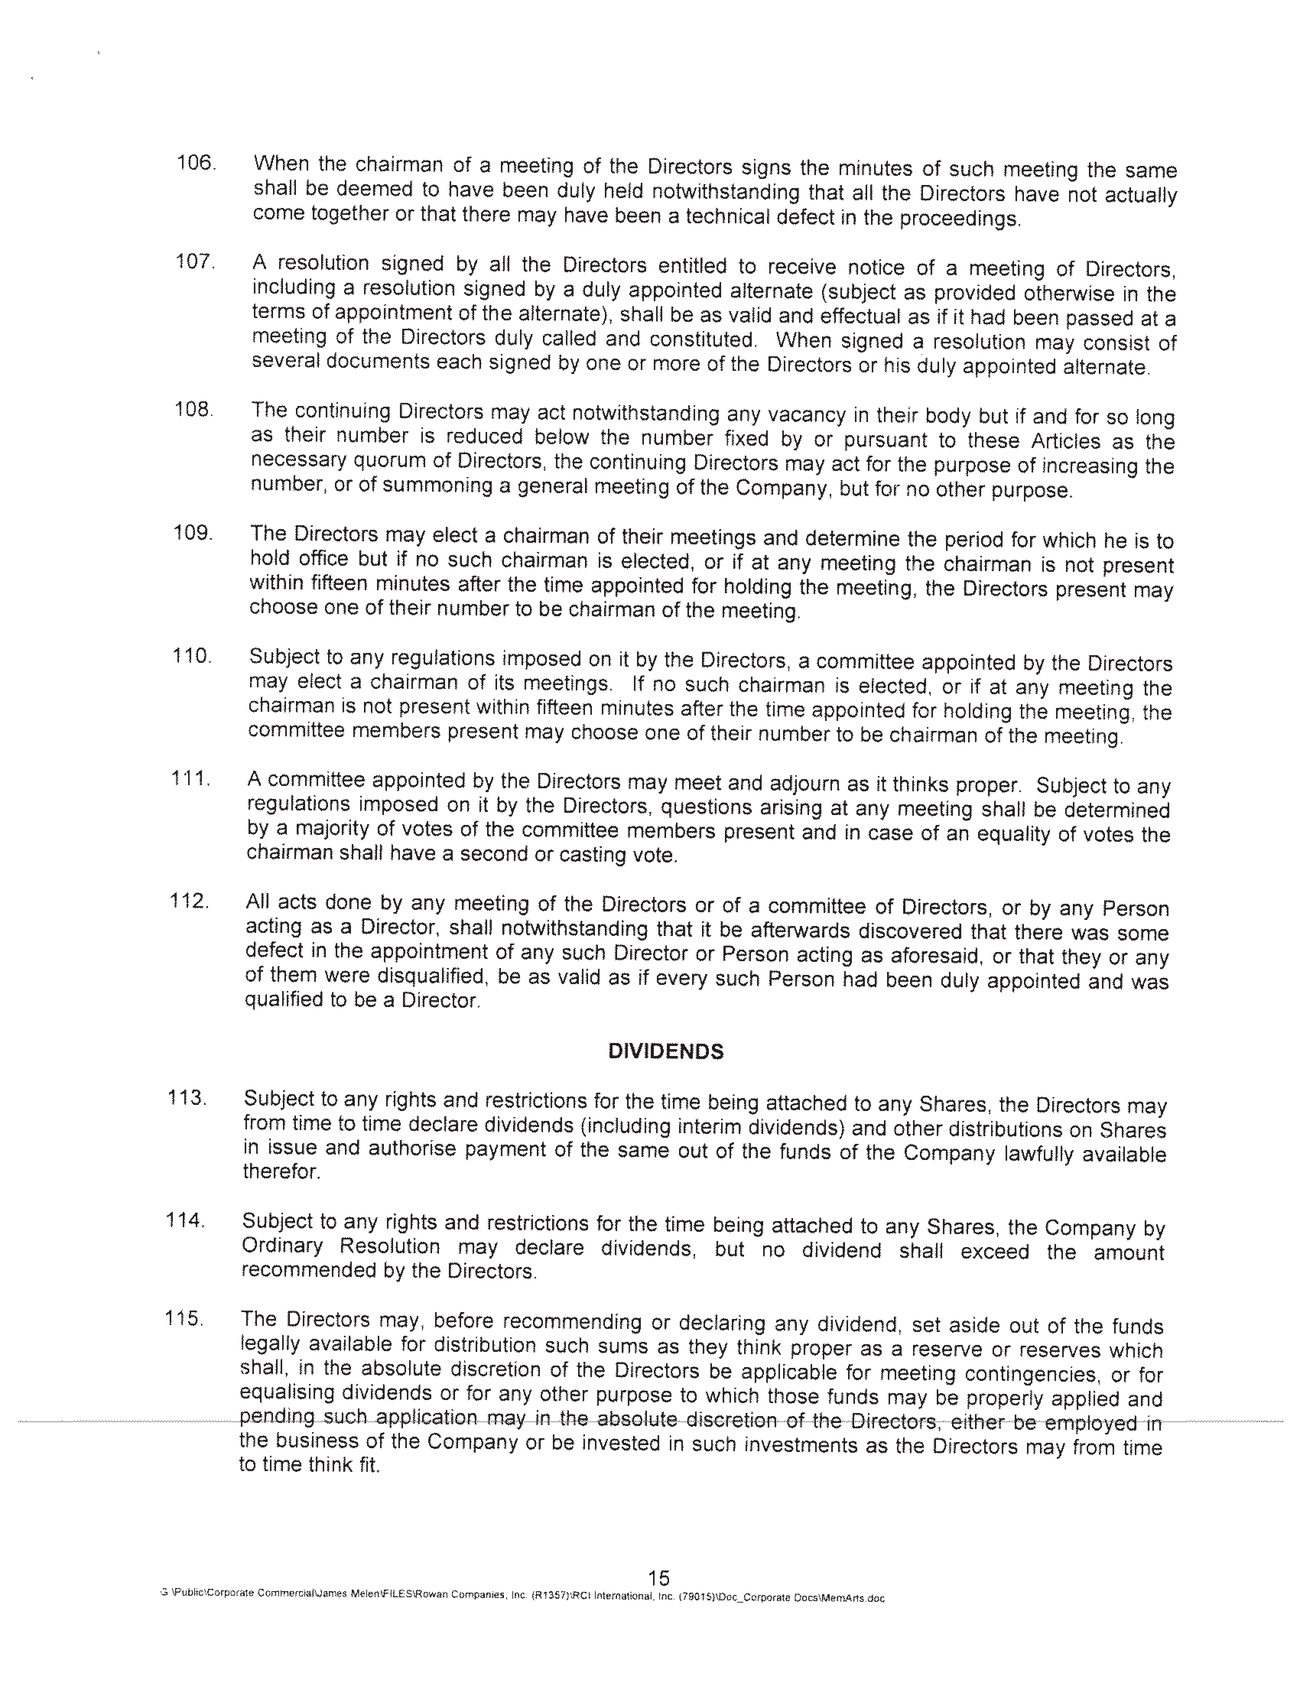 New Microsoft Word Document - Copy_page003page020page001 memorandum and articles of association of rci international inc_page020.jpg